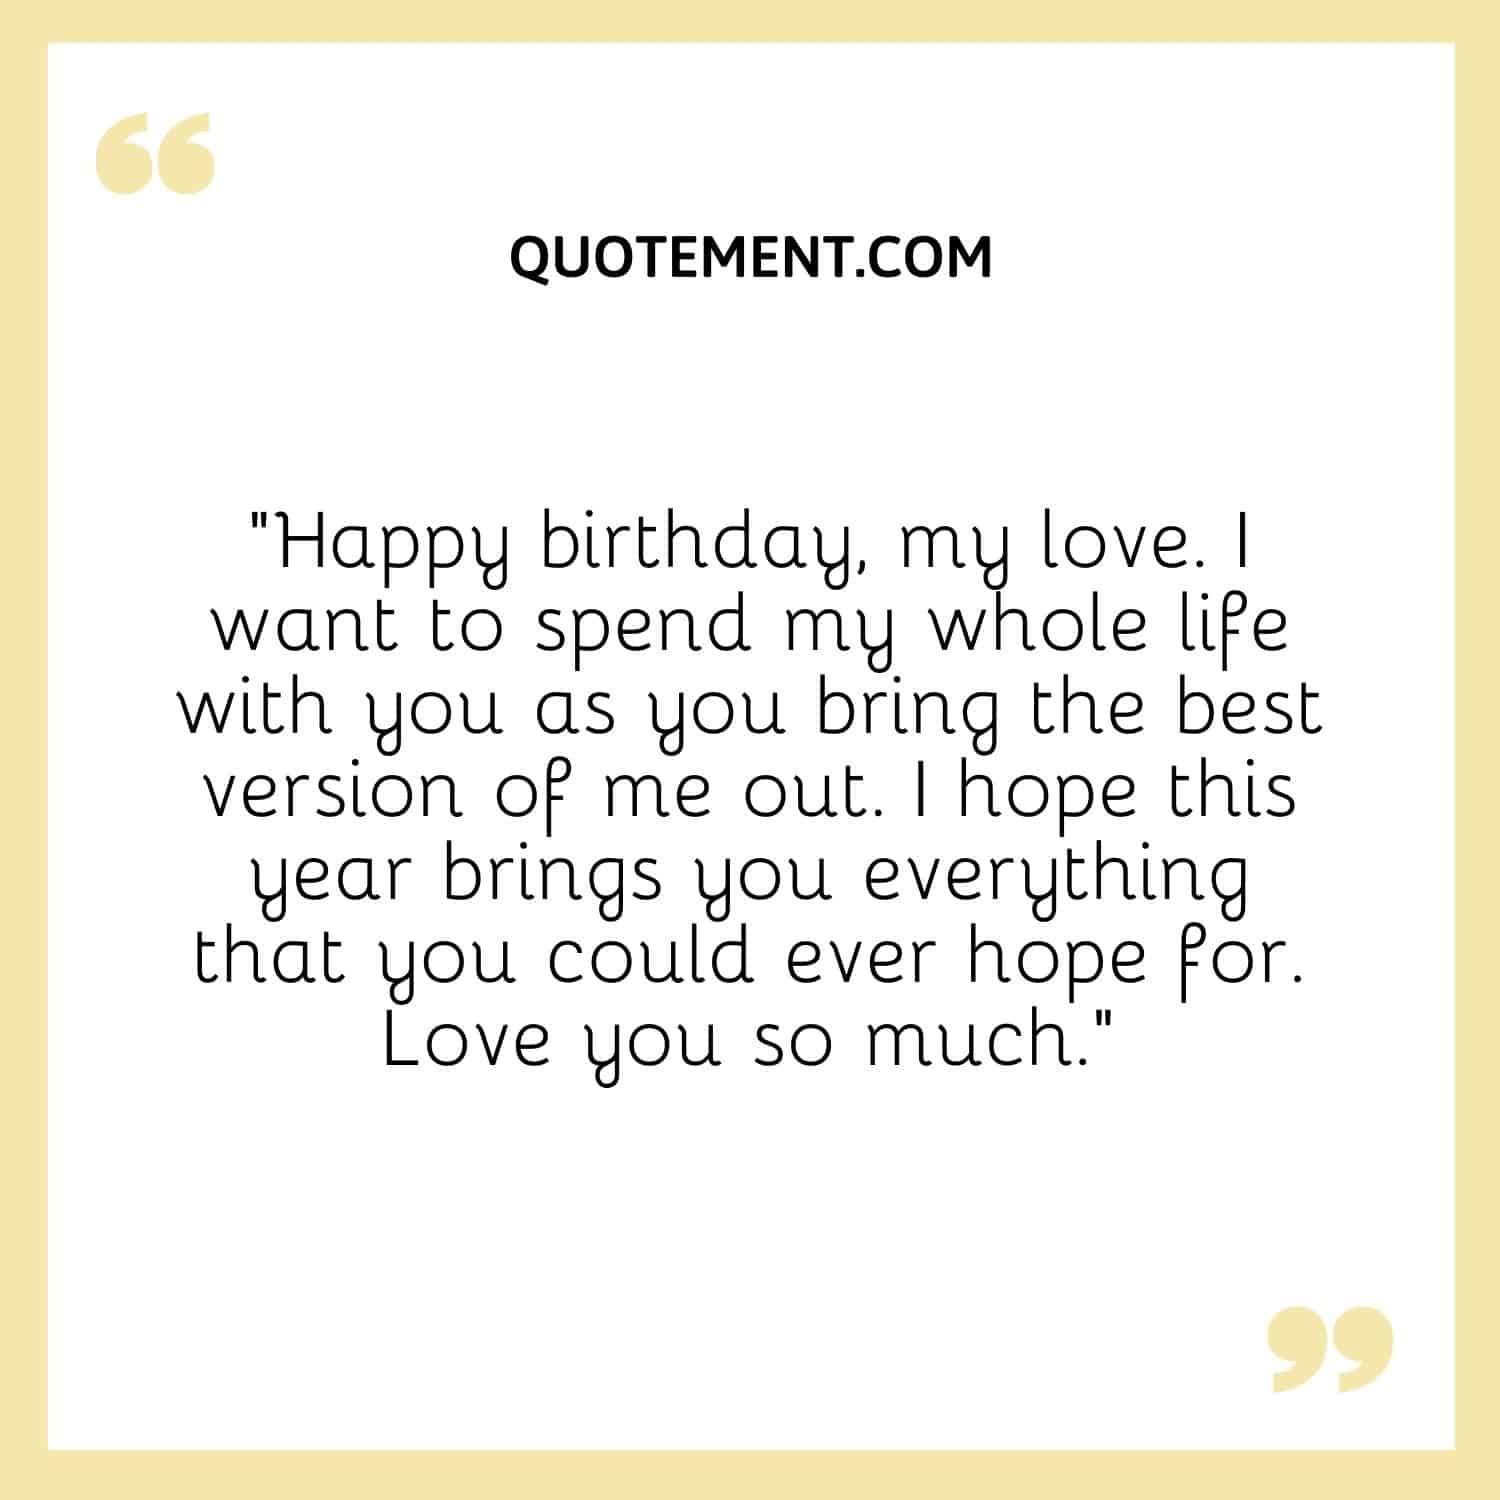 “Happy birthday, my love. I want to spend my whole life with you as you bring the best version of me out. I hope this year brings you everything that you could ever hope for. Love you so much.”